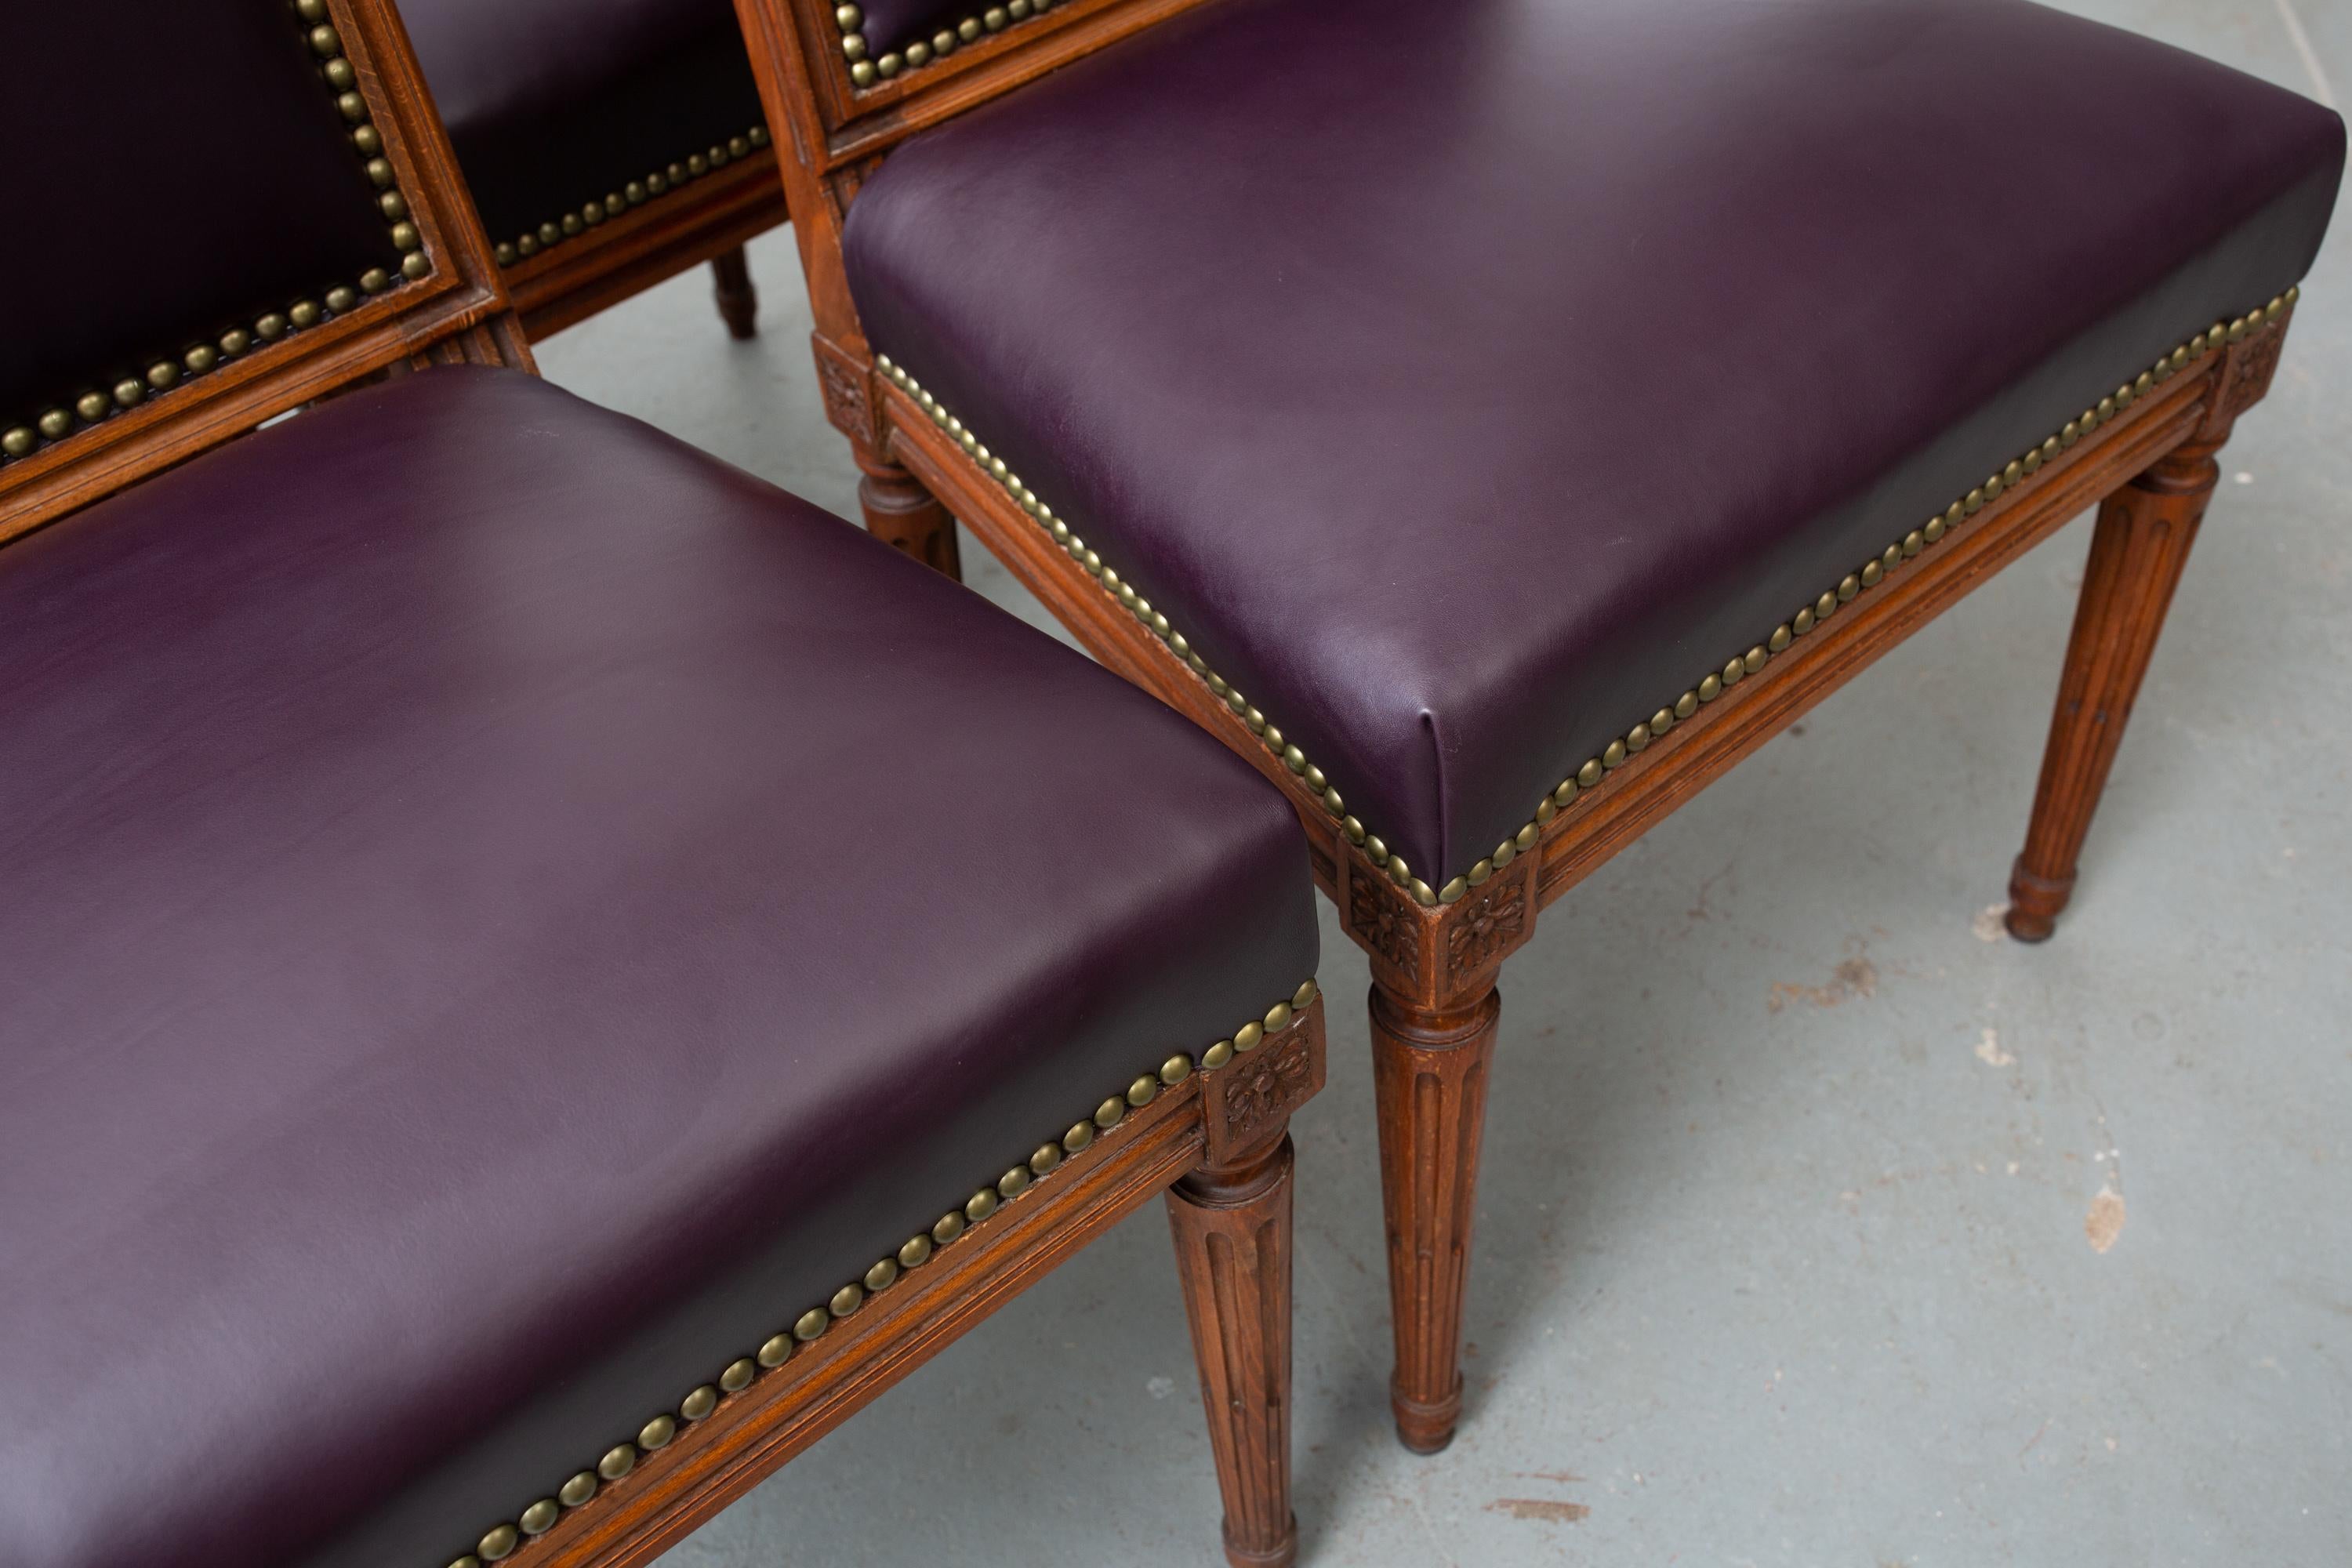 Set of four, 1940s Louis XVI style carved wood dining chairs newly upholstered in aubergine leather with nailhead trim. Tapered and fluted legs with carved flower detail to the corners. Wood is in great original condition. Very sturdy.